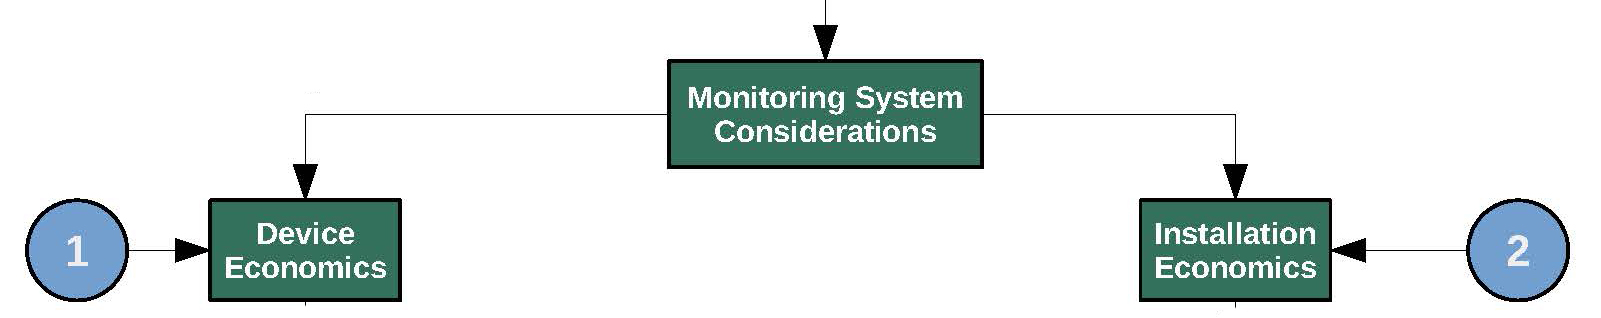 Section of the decision tree addressing monitoring system considerations involving device economics and installation economics